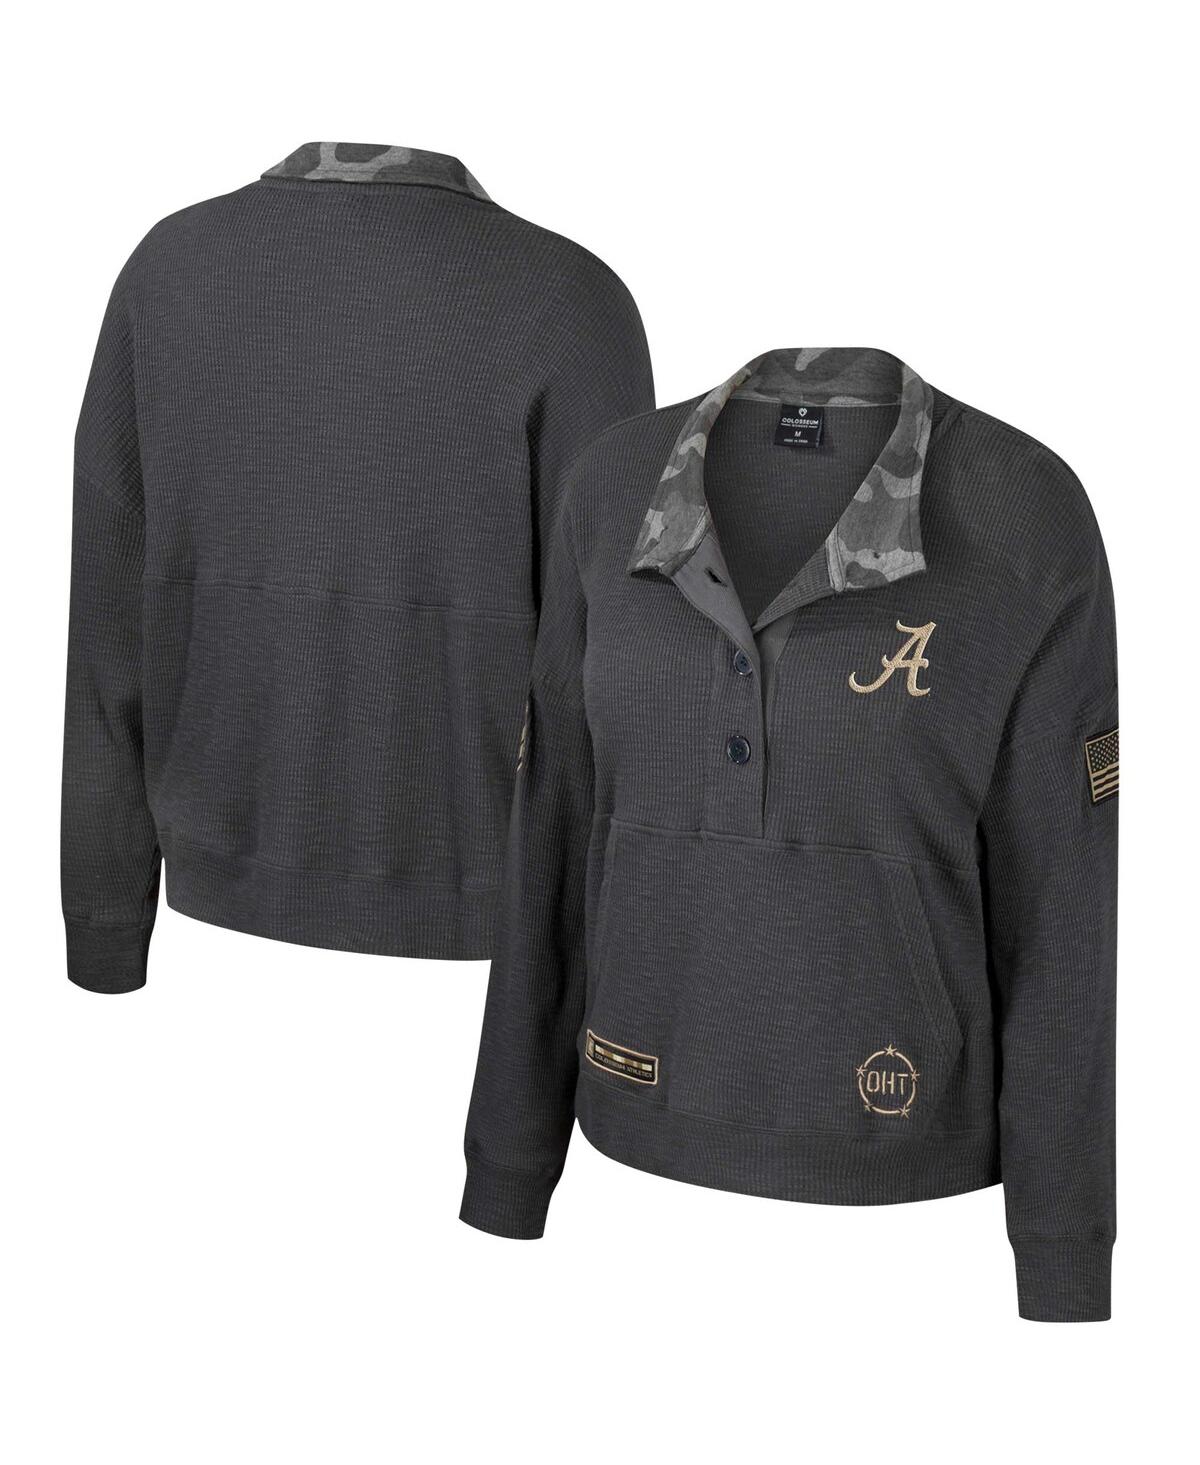 Women's Colosseum Heather Charcoal Alabama Crimson Tide Oht Military-Inspired Appreciation Payback Henley Thermal Sweatshirt - Heather Charcoal